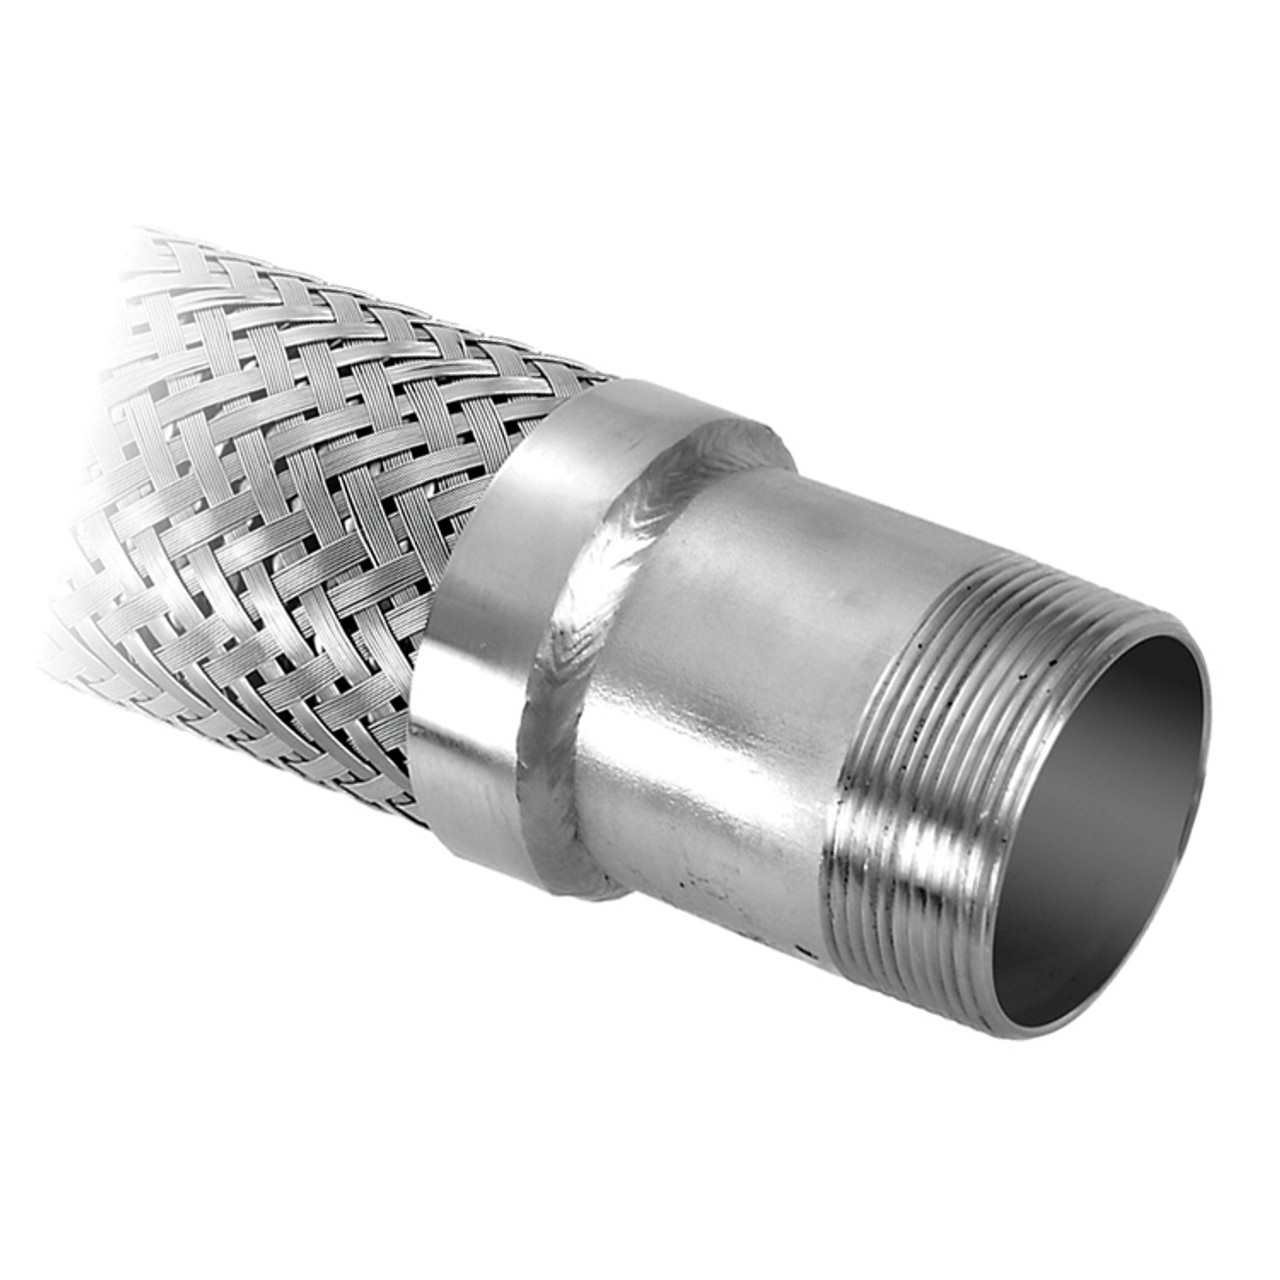 1/4 x 1/4" x 12" Stainless Steel Hose Assembly CSA w/ Male Plain NPT Ends   G521CSA-025MM-12